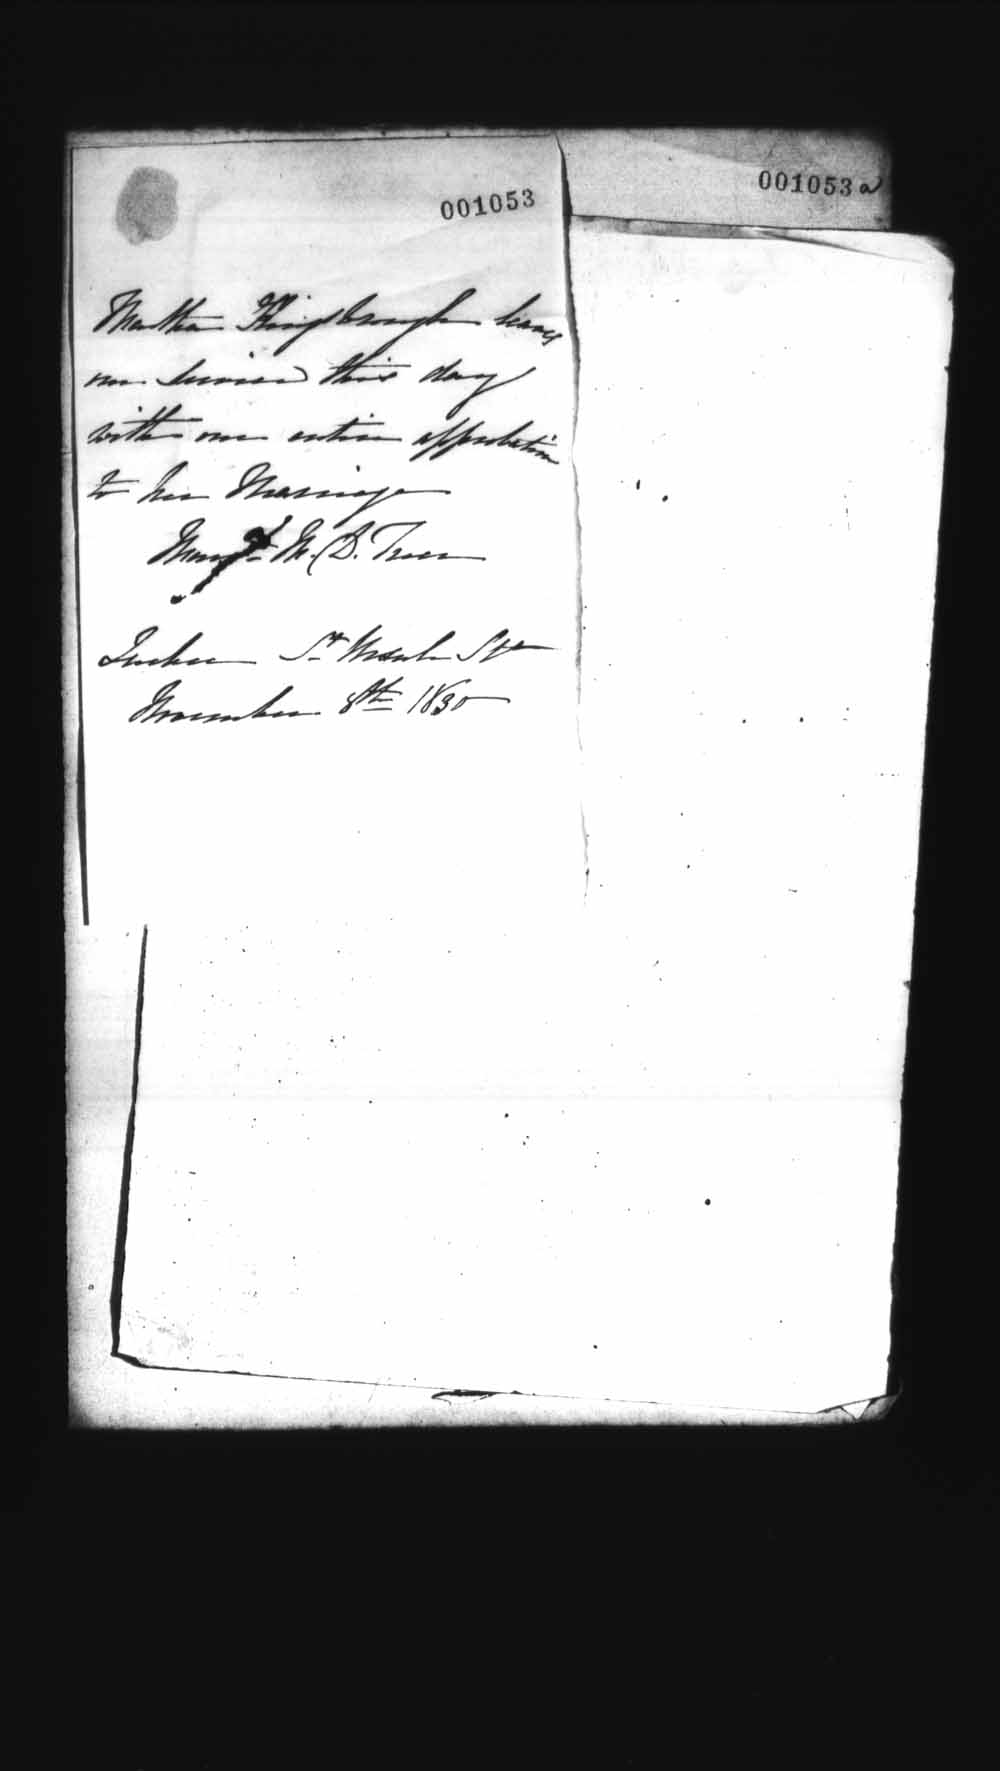 Digitized page of Upper and Lower Canada Marriage Bonds (1779-1865) for Image No.: e008237177